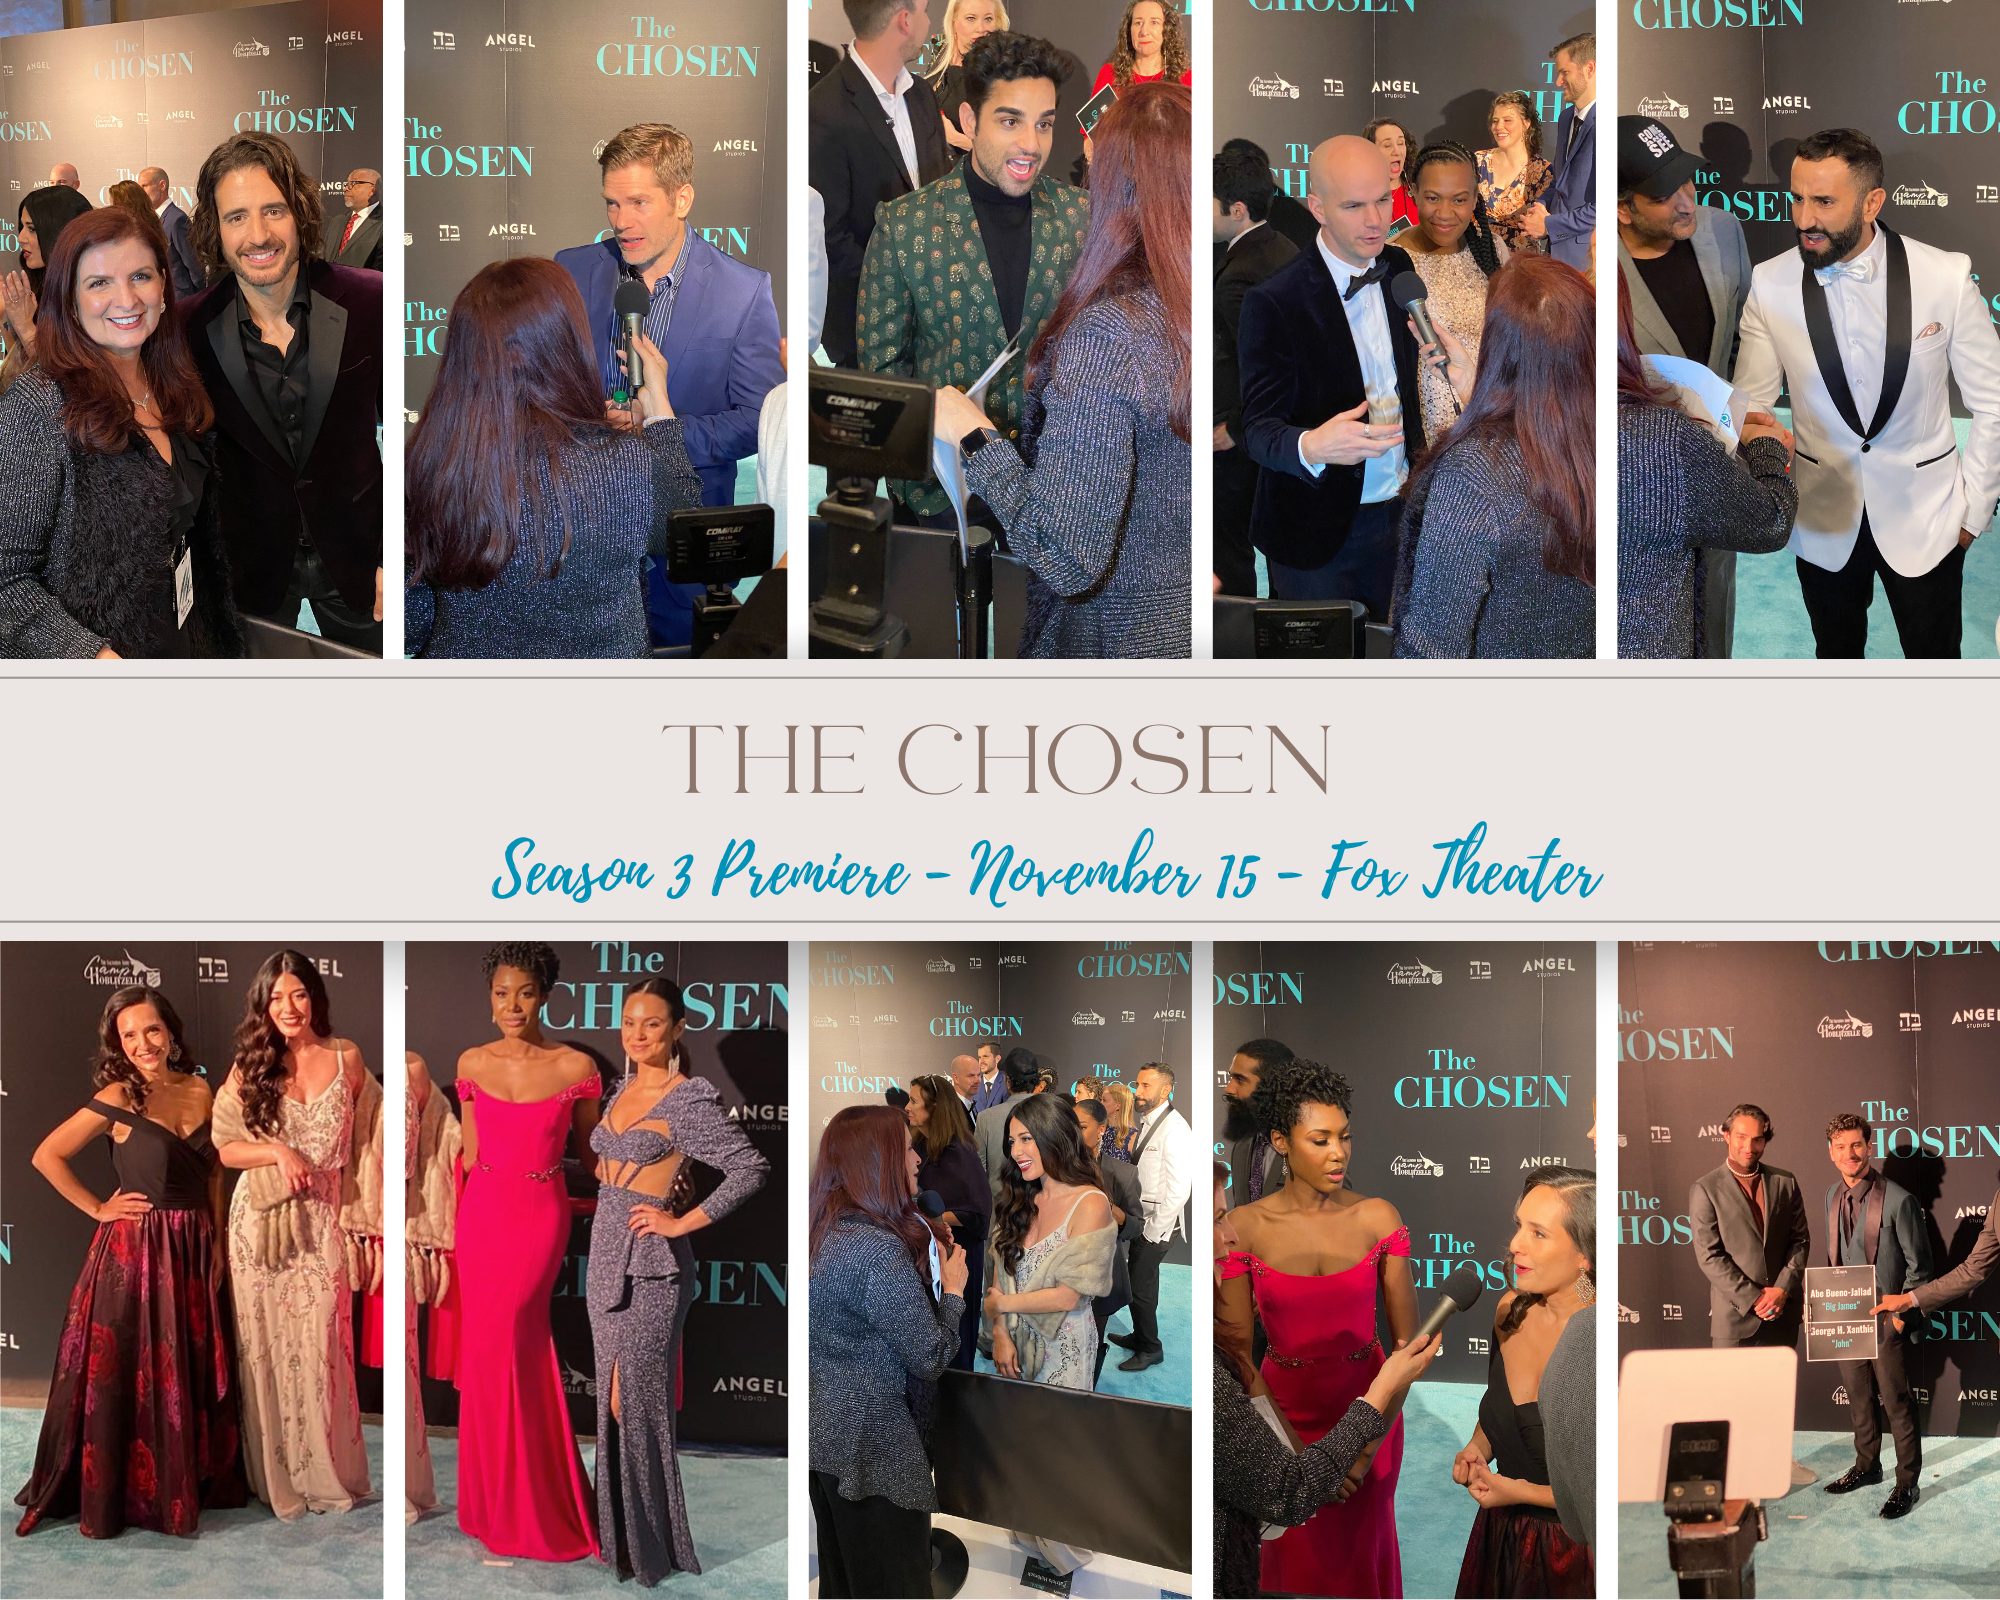 The Yellow Affair Boards YA Series 'The Chosen Ones, the chosen ones 